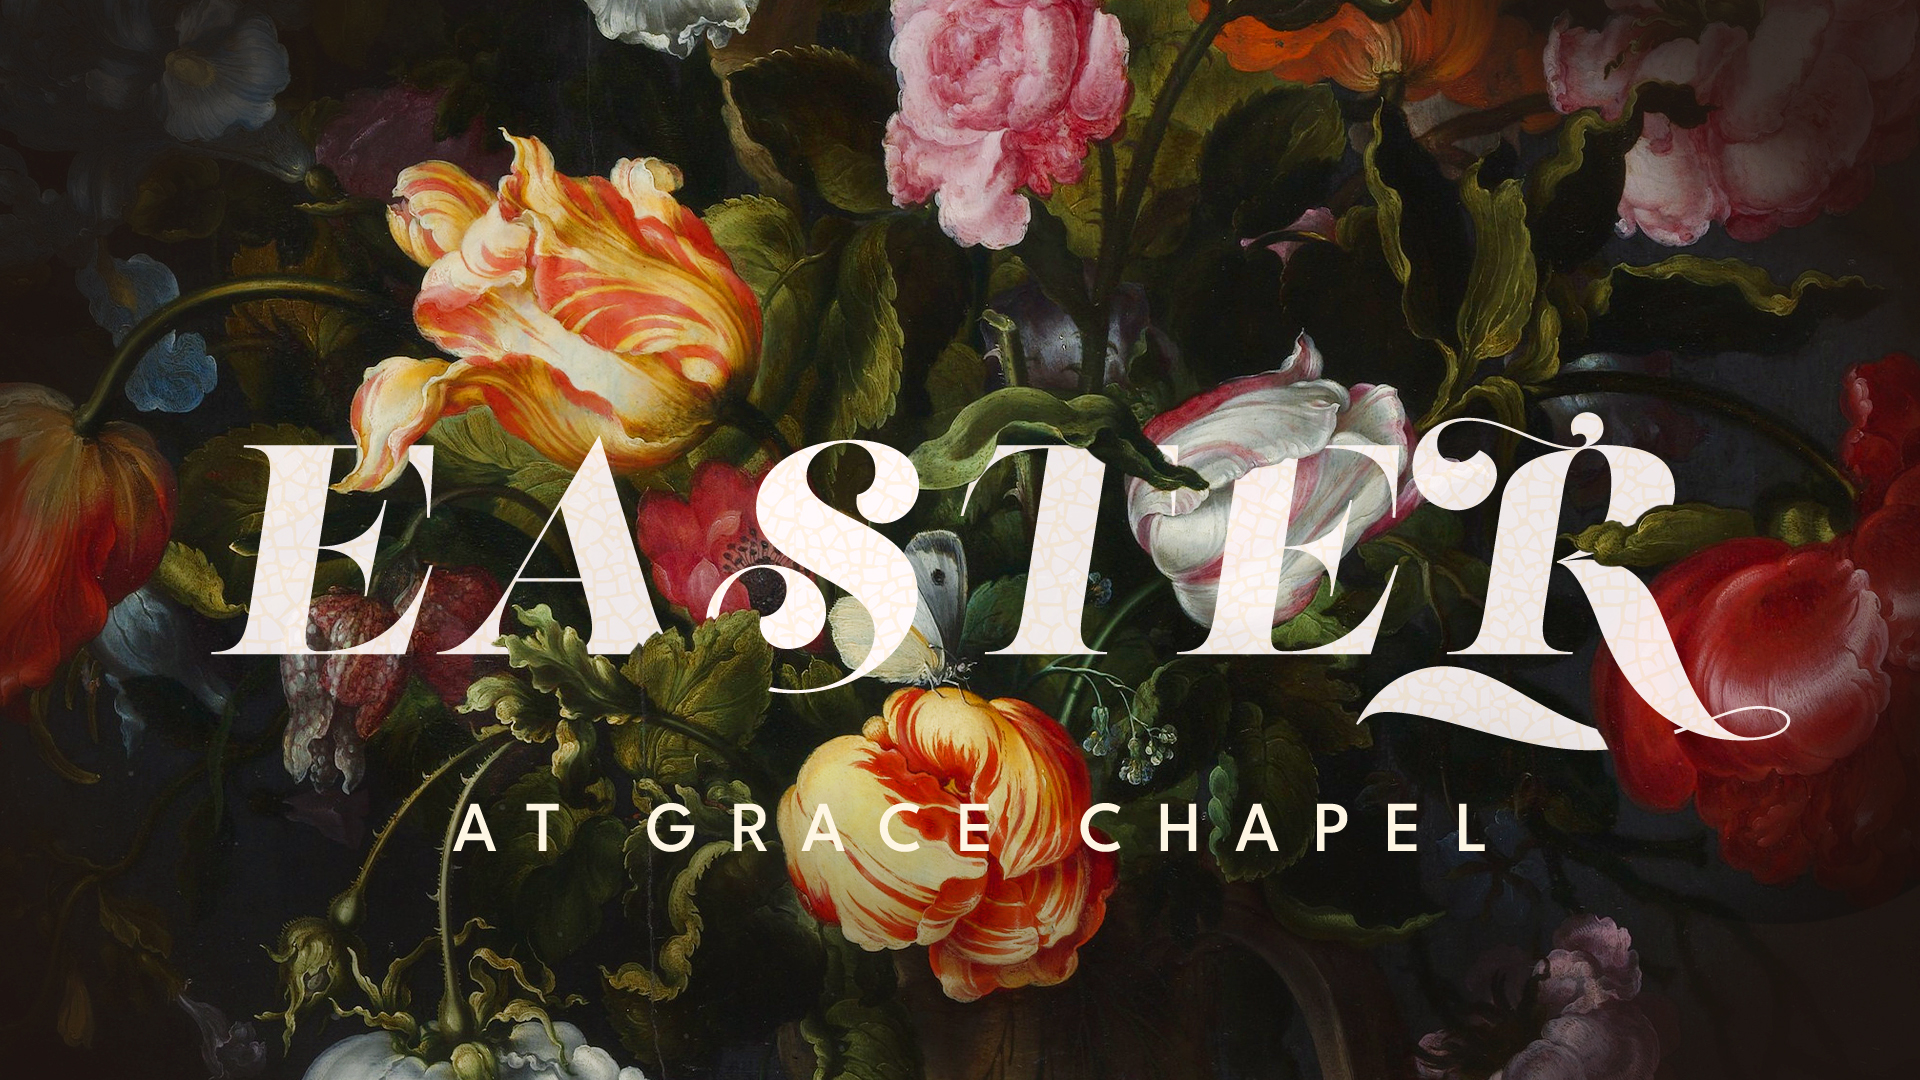 Easter at Grace Chapel (The Death of the Fear of the Future ; 1 Thessalonians 4:13-18)